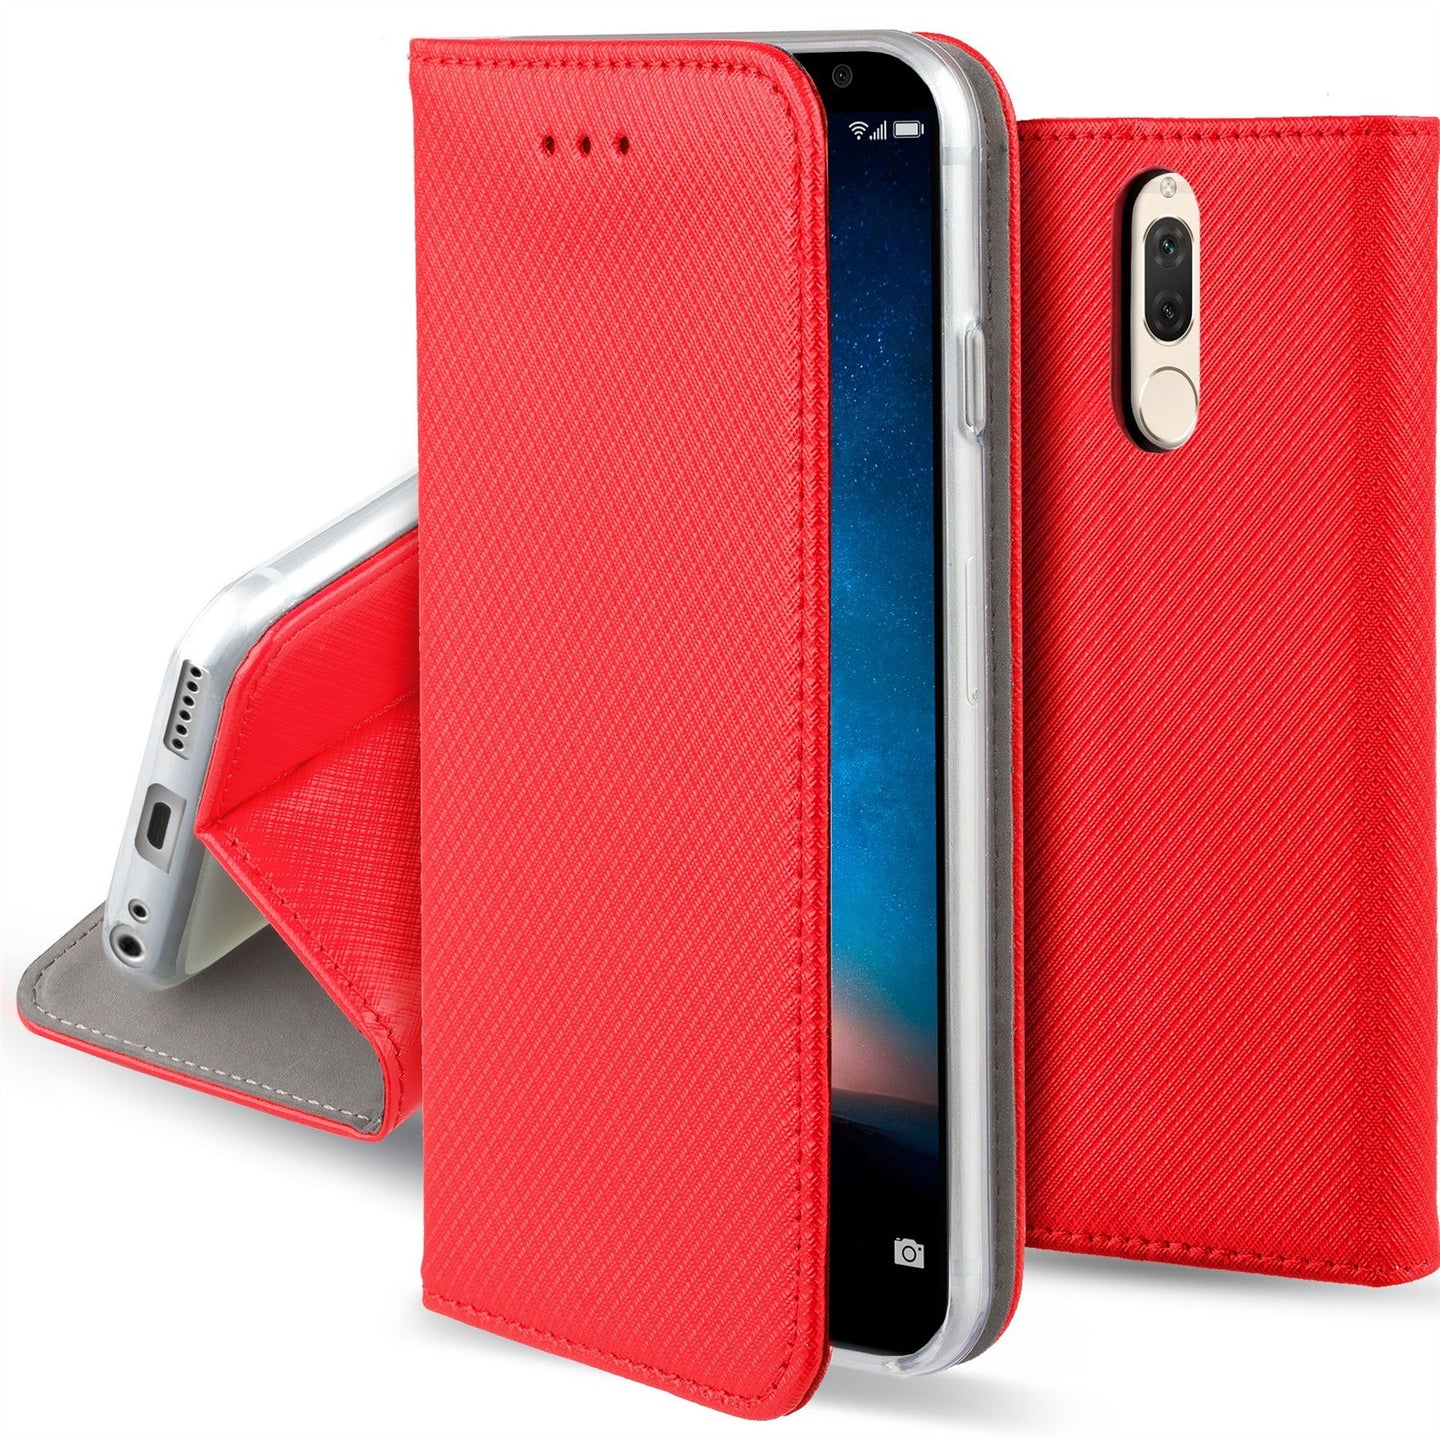 Moozy Case Flip Cover for Huawei Mate 10 Lite, Red - Smart Magnetic Flip Case with Card Holder and Stand